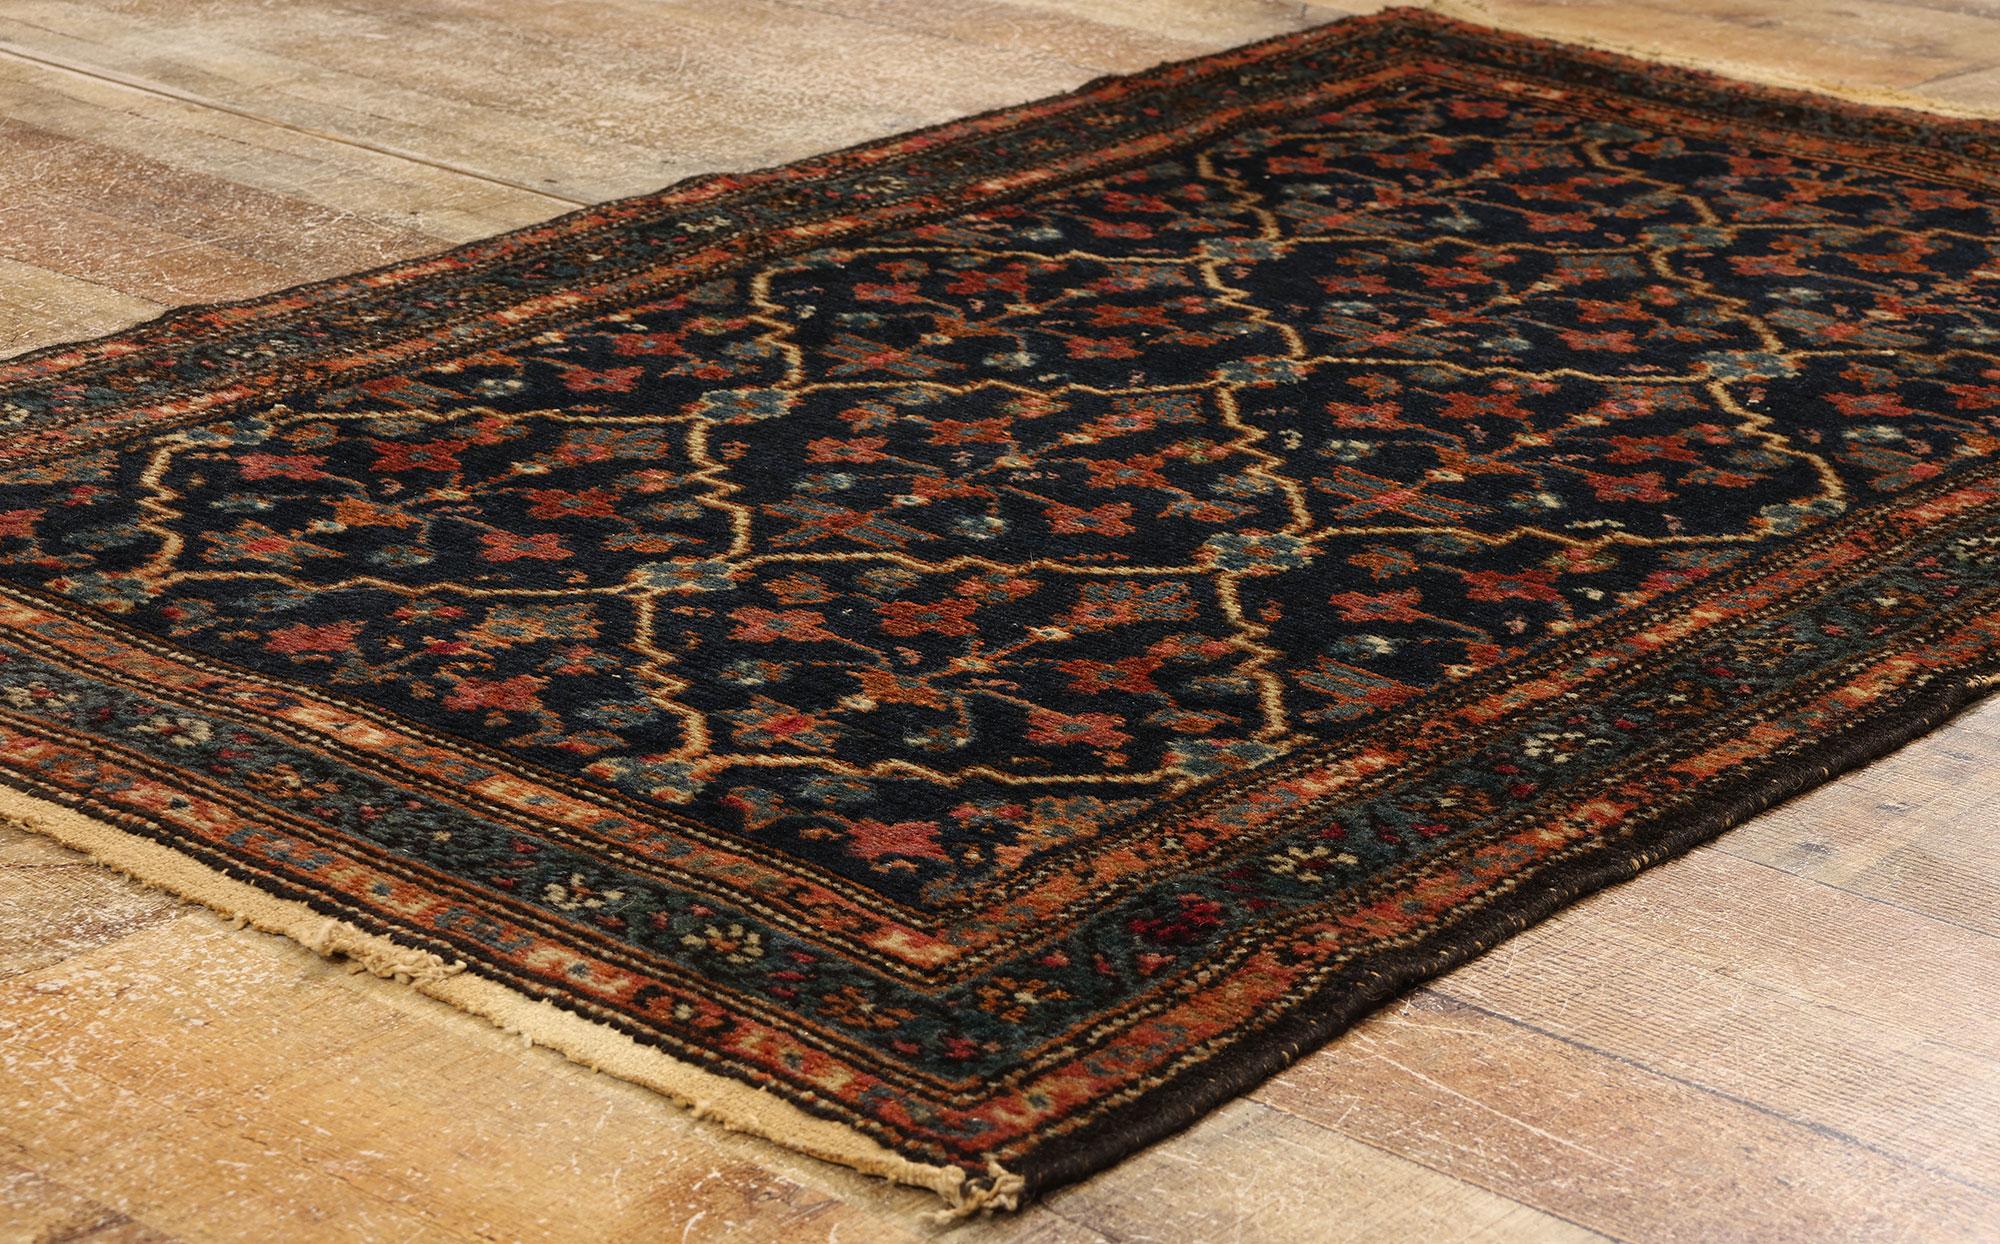 Wool Antique Black Persian Hamadan Rug, Timeless Allure Meets Enigmatic Elegance For Sale